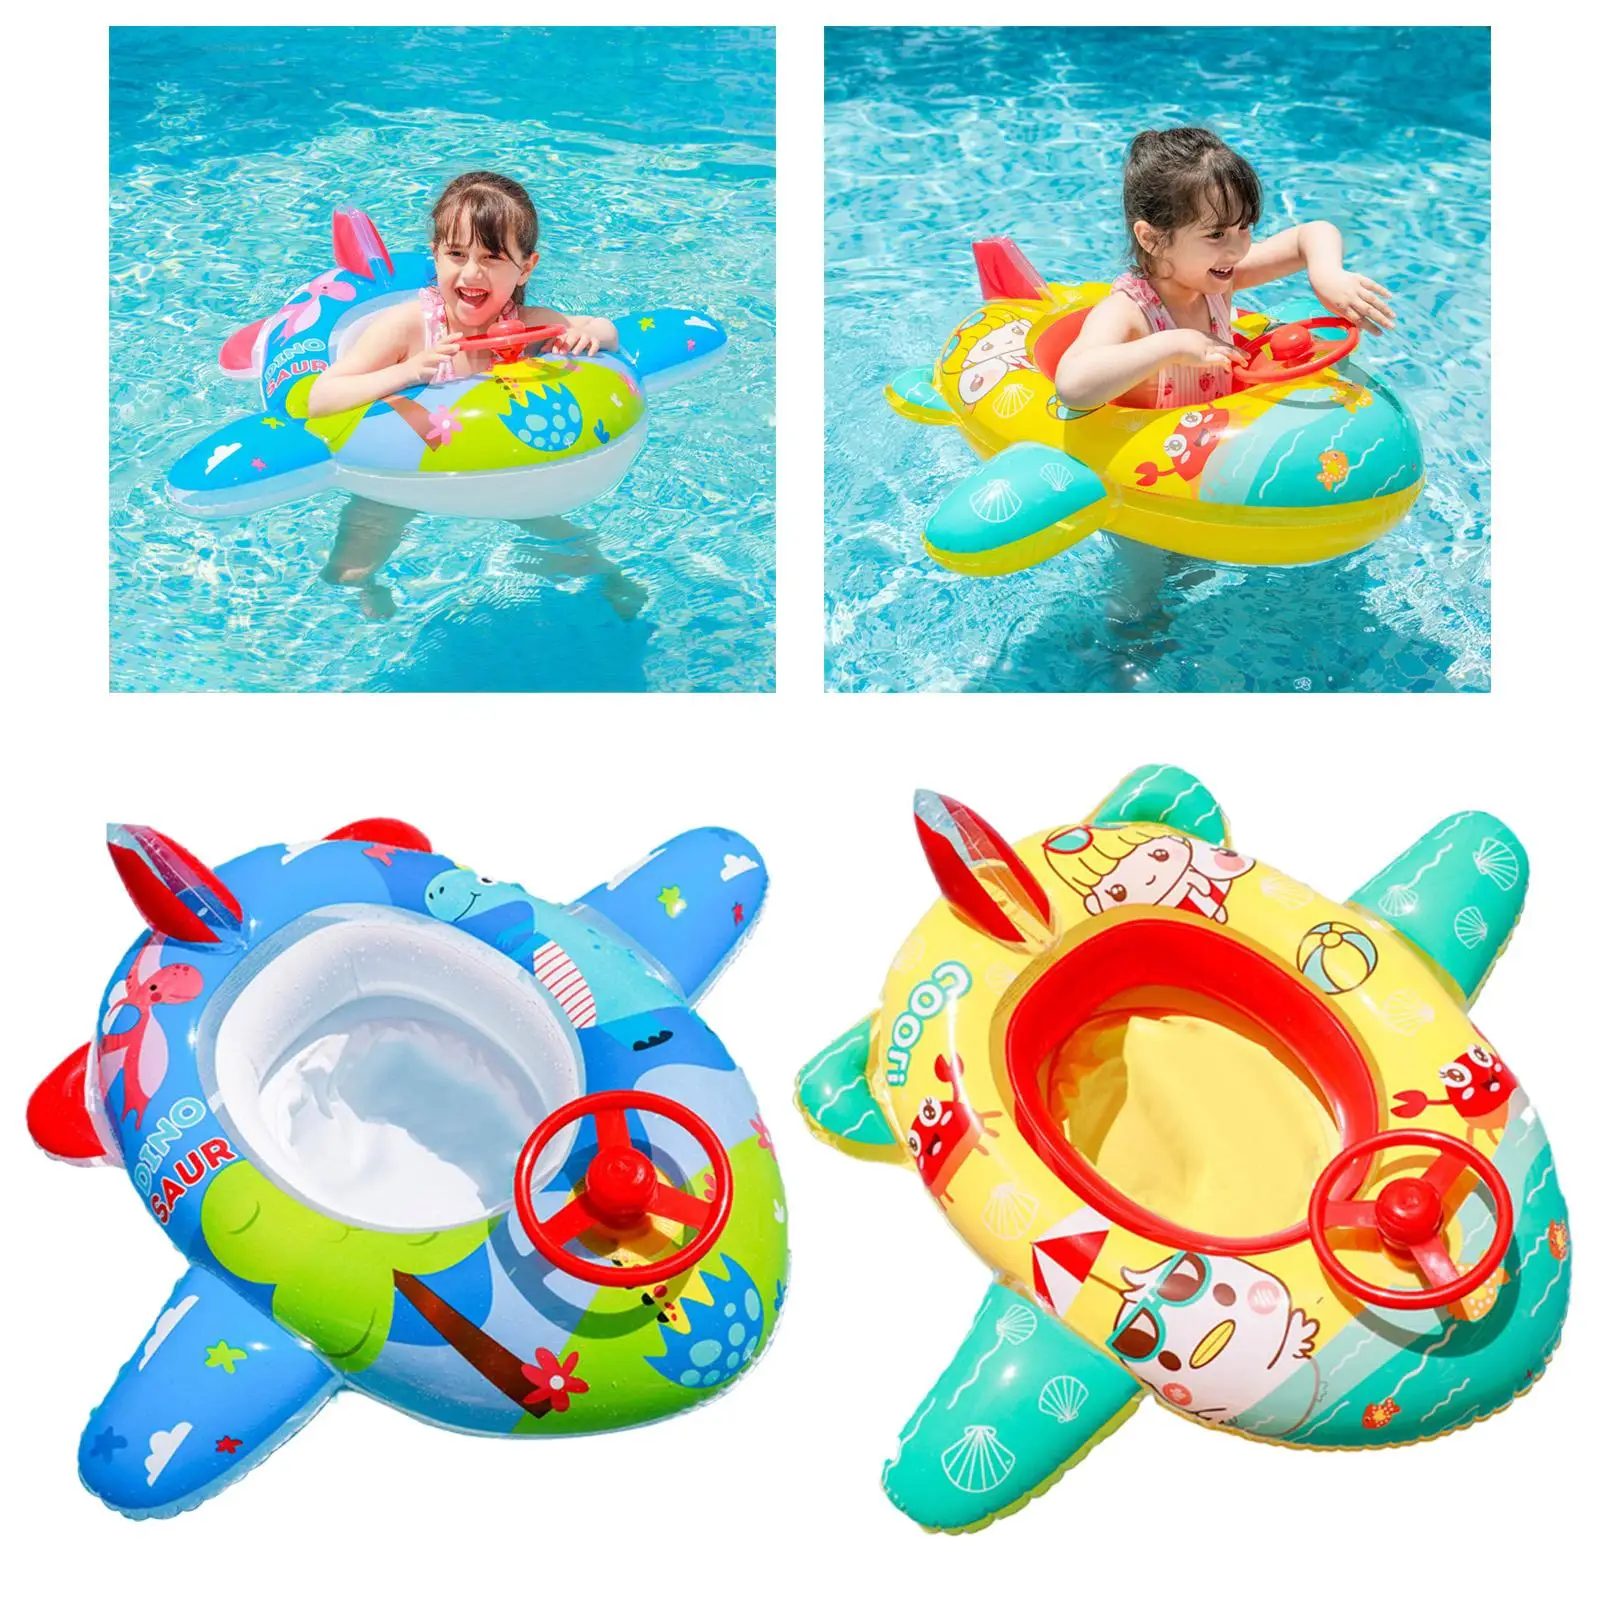 Aircraft Swimming Inflatable for Boys Girls Pool Swim Toys